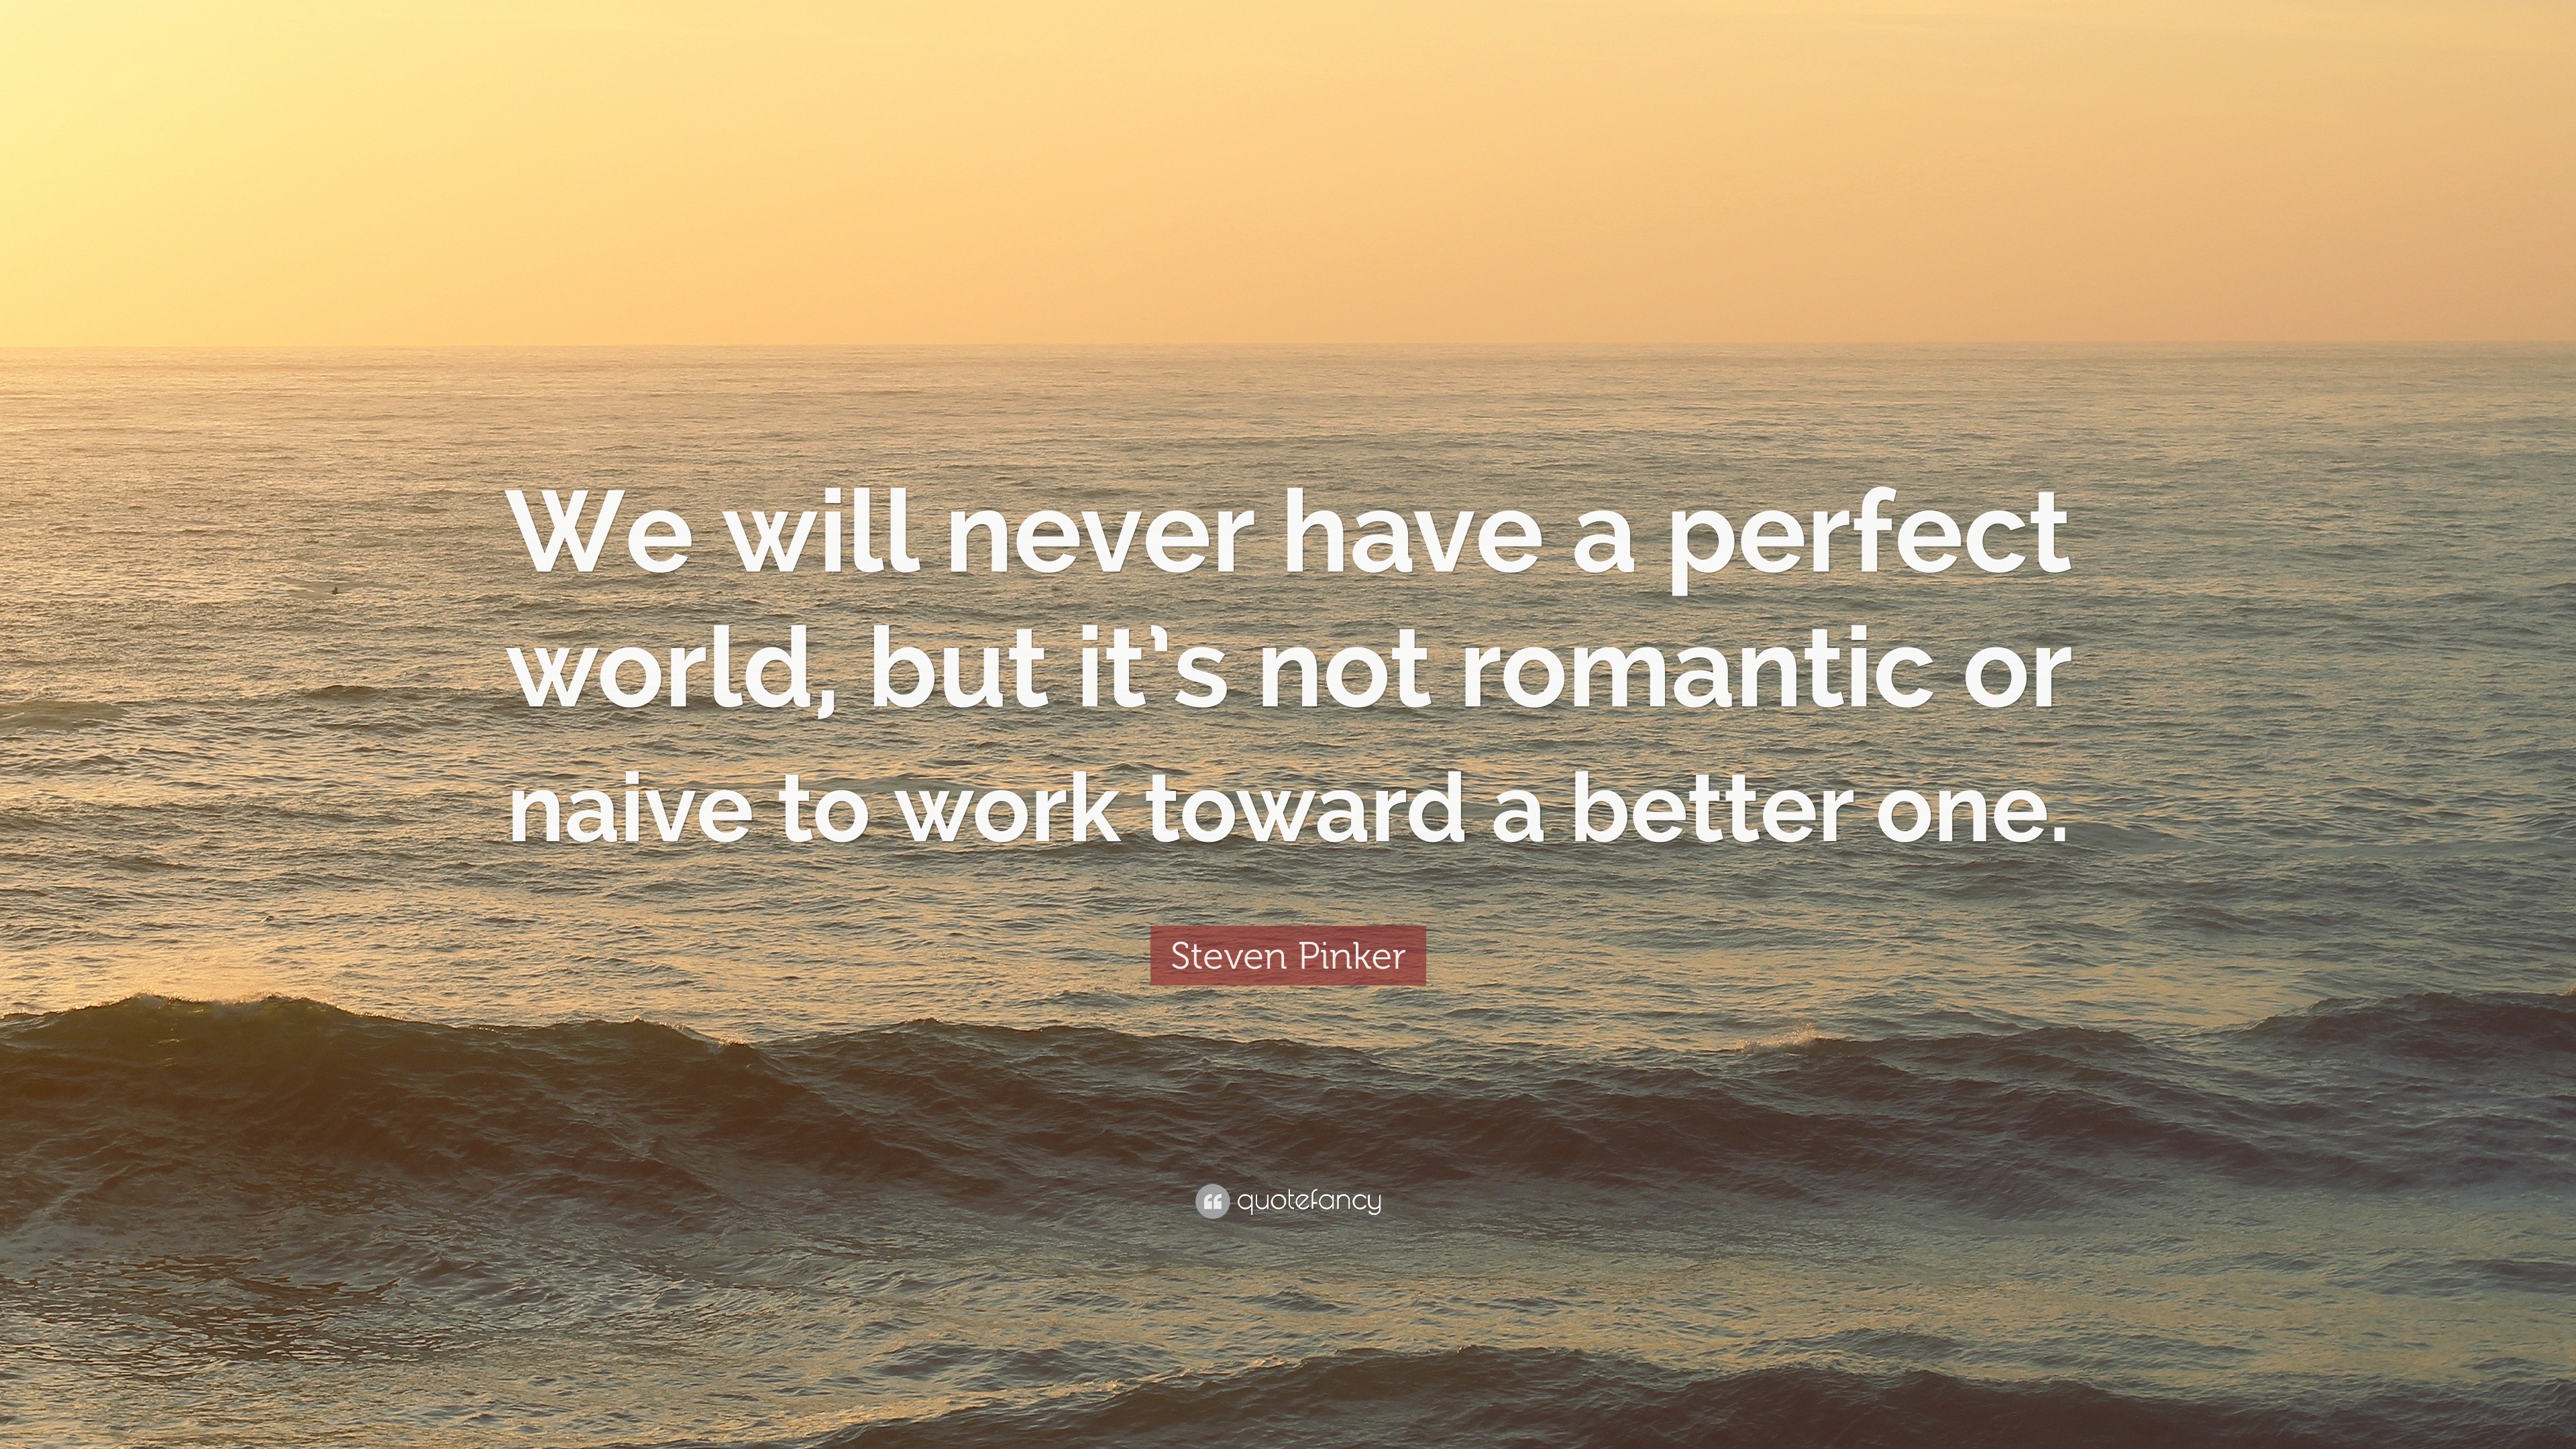 Steven Pinker Quote: "We will never have a perfect world, but it's not romantic or naive to work ...